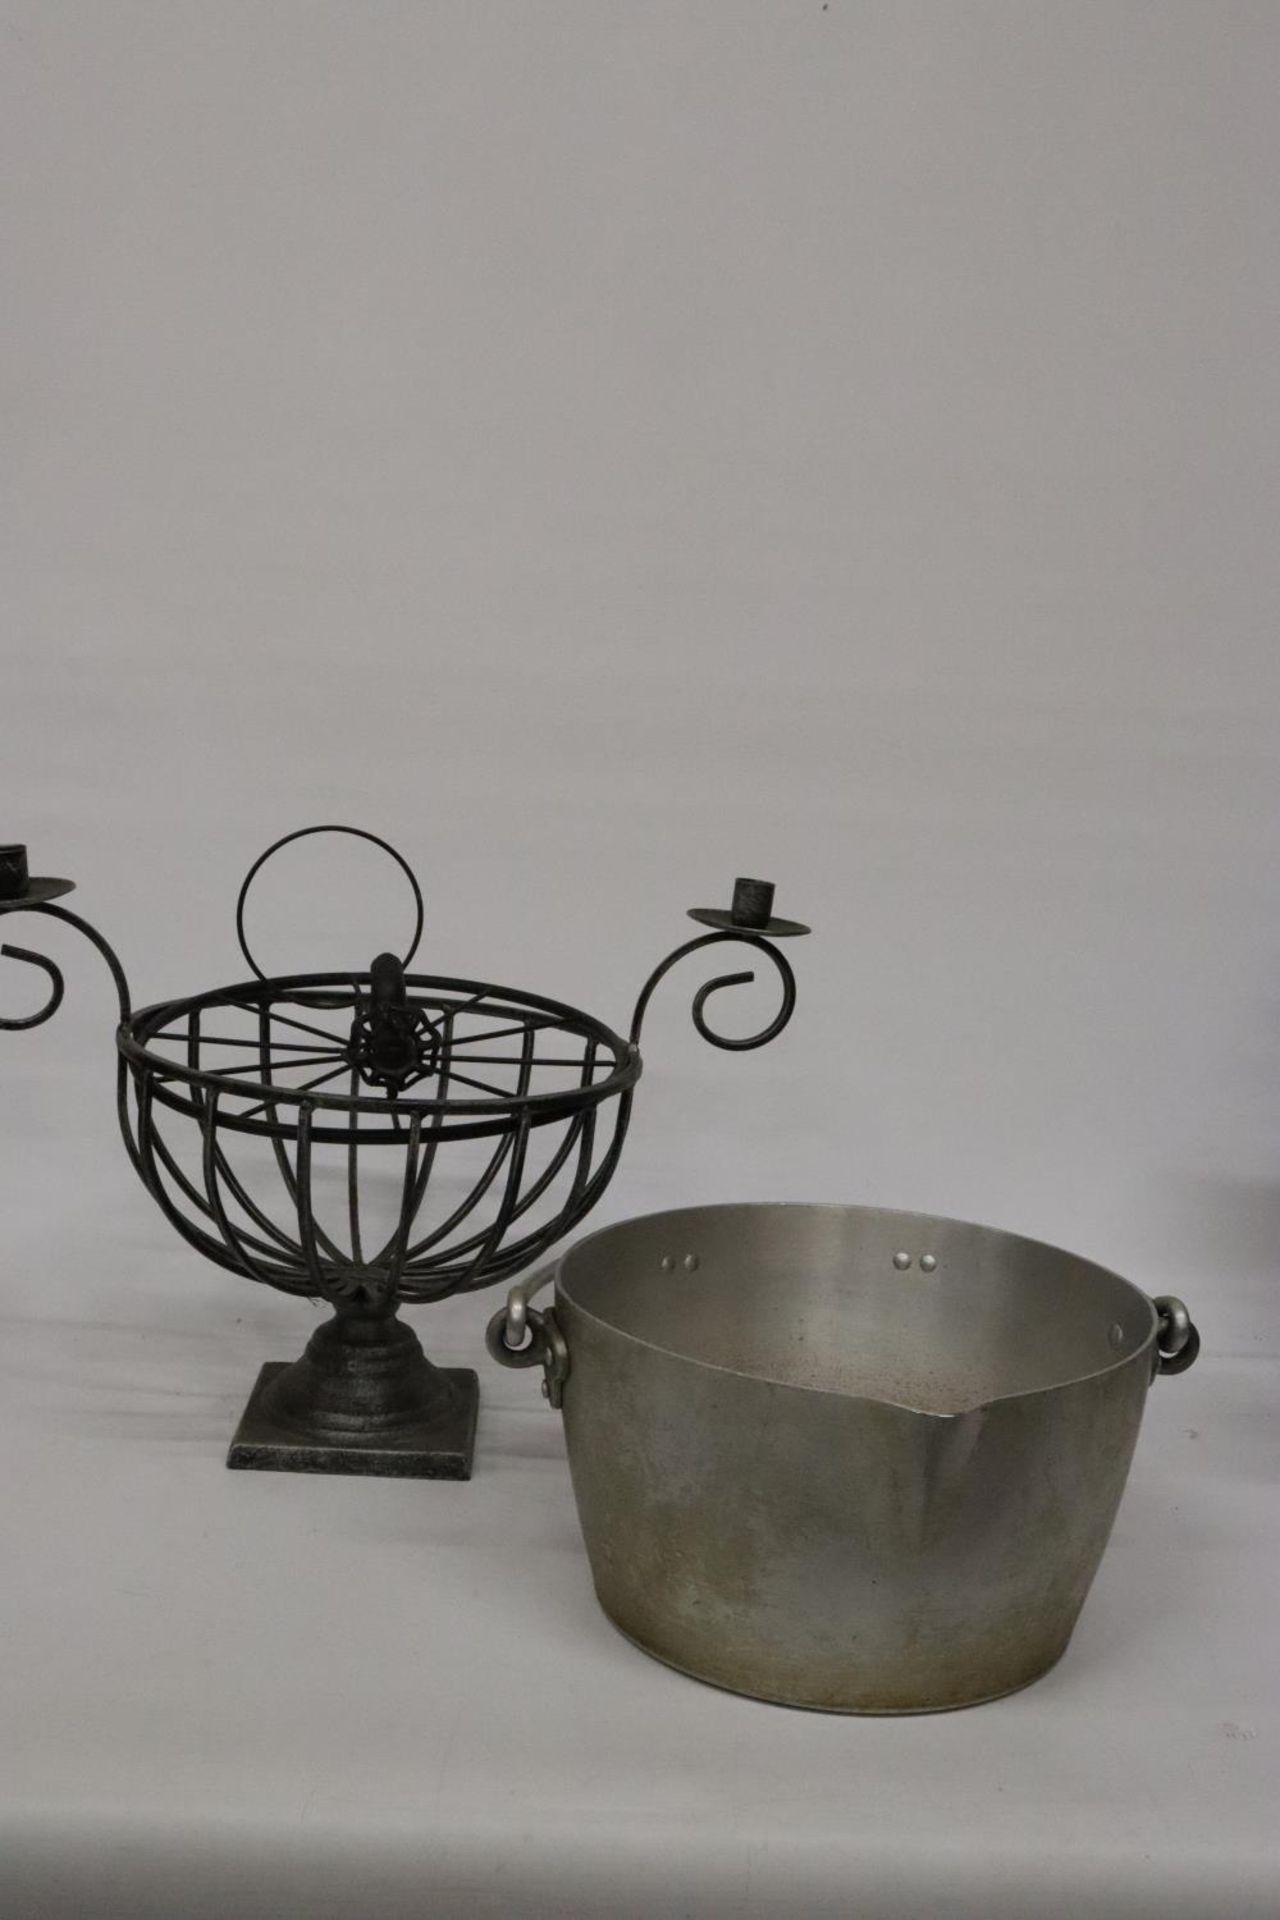 A JAM PAN AND A METAL PLANT HOLDER WITH CANDLESTICKS